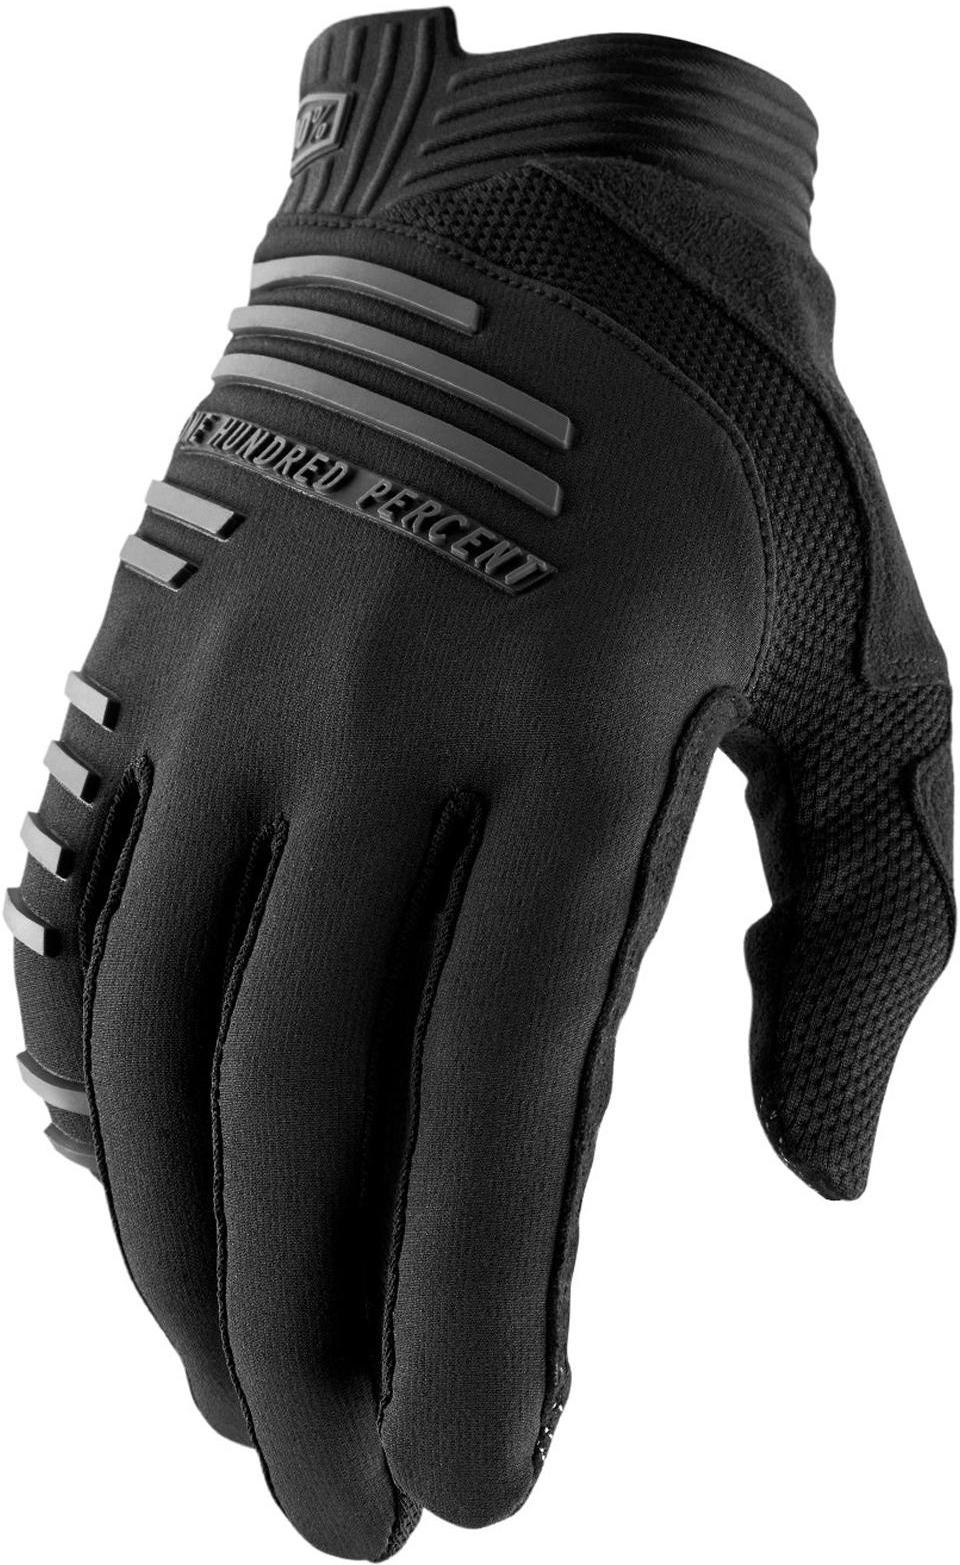 100% Cognito D30 Gloves - Md Black/charcoal   Gloves